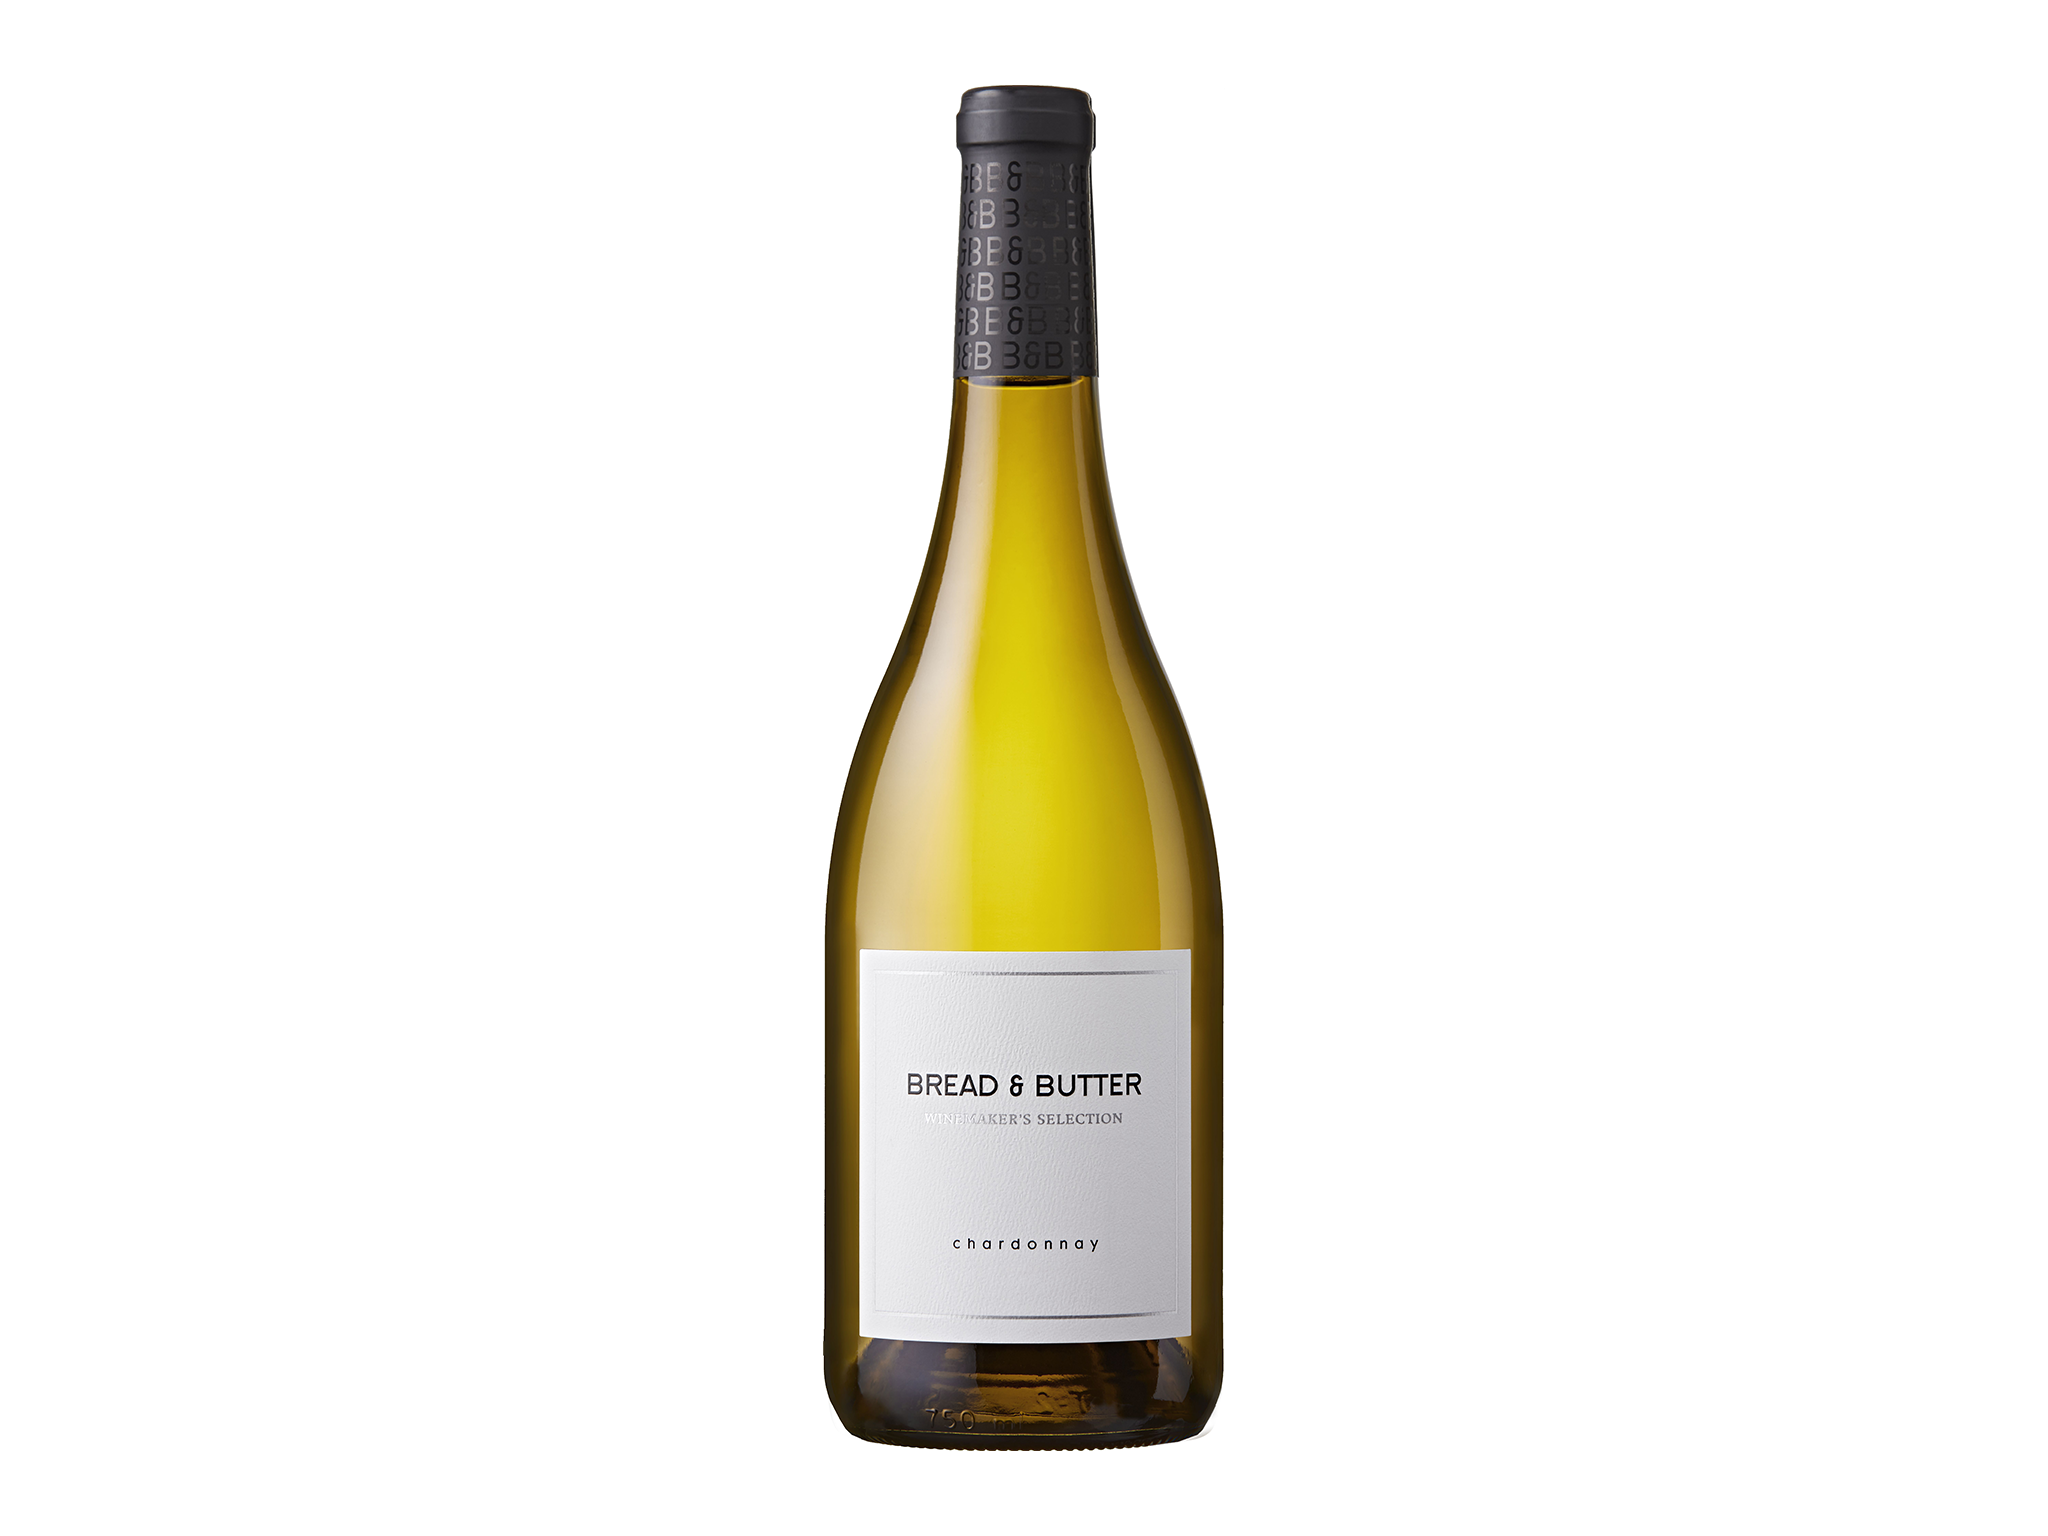 Bread and Butter chardonnay 2020/21, California 